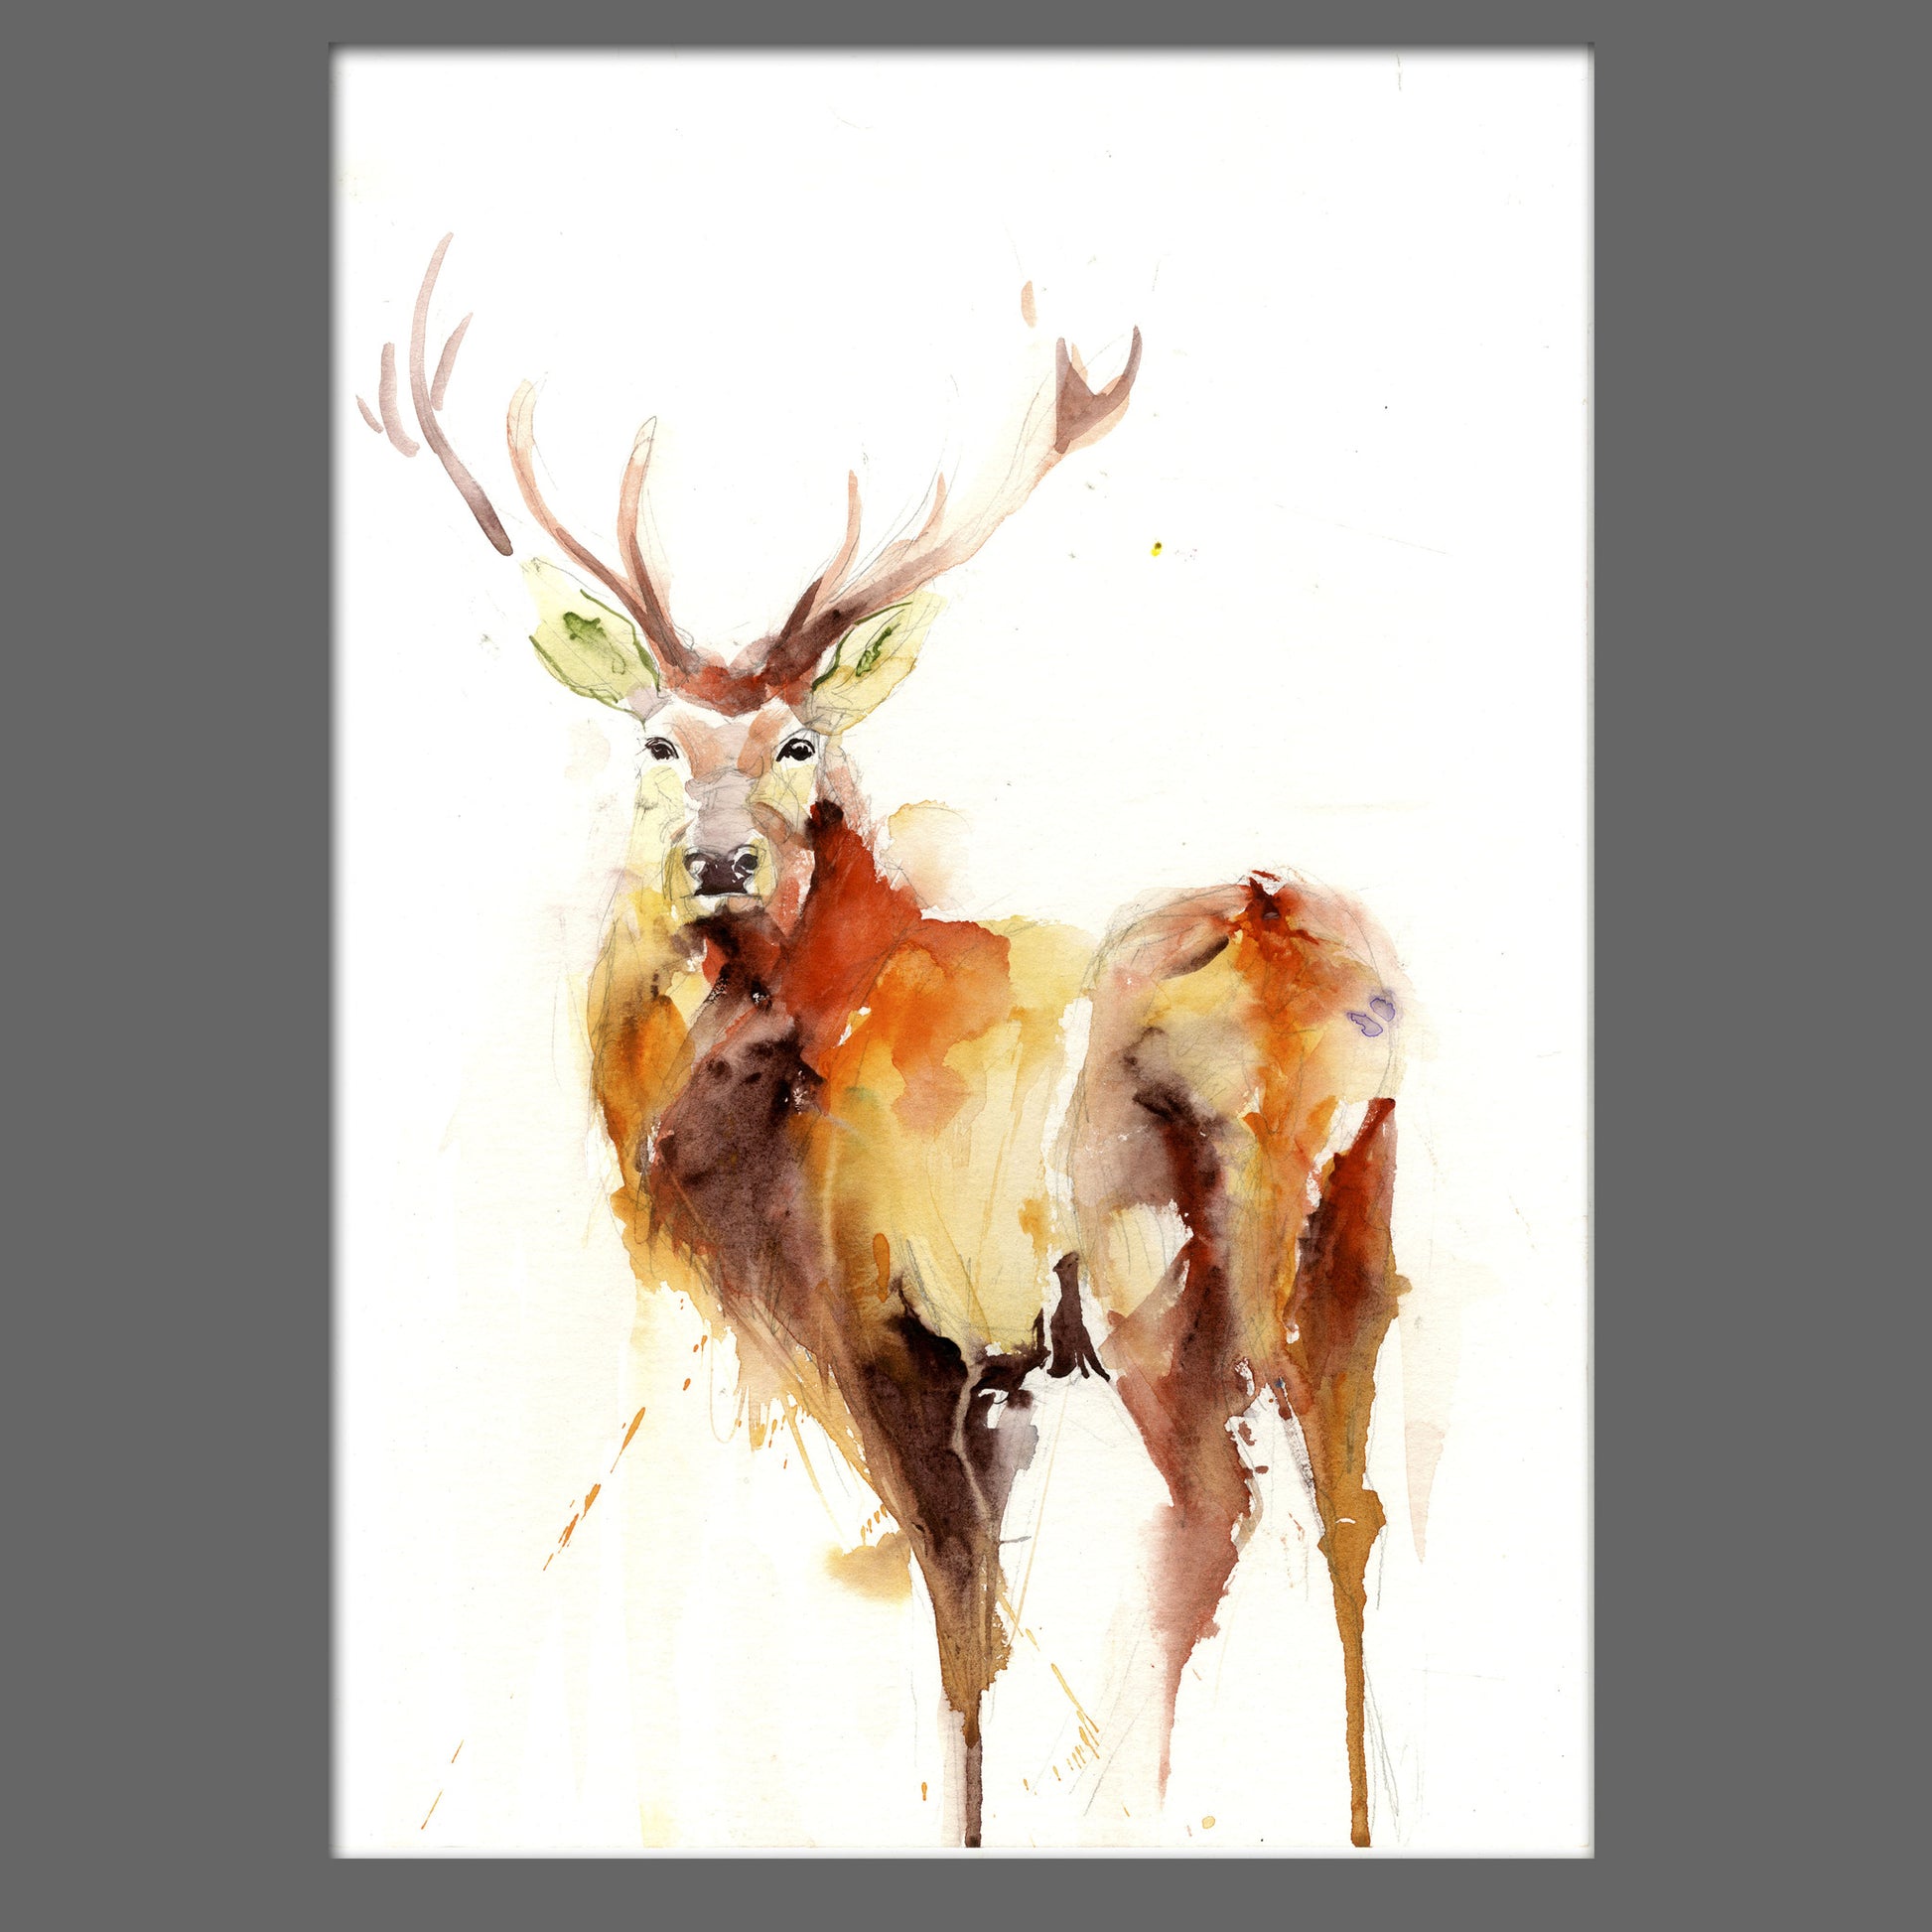 signed LIMITED EDITON PRINT of my original STAG  - Jen Buckley Art limited edition animal art prints